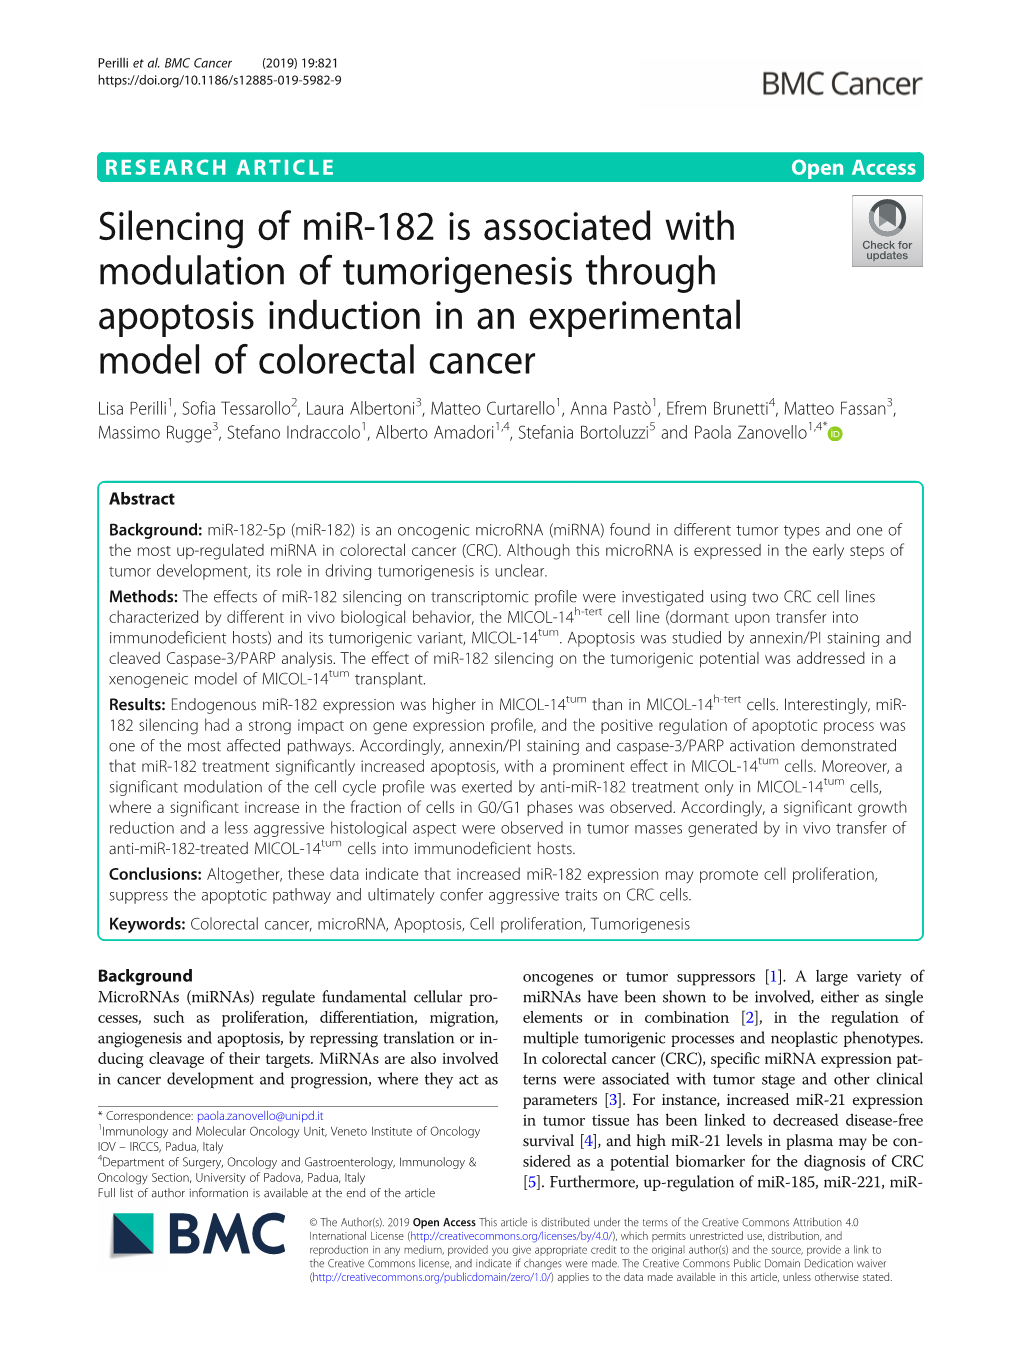 Silencing of Mir-182 Is Associated with Modulation of Tumorigenesis